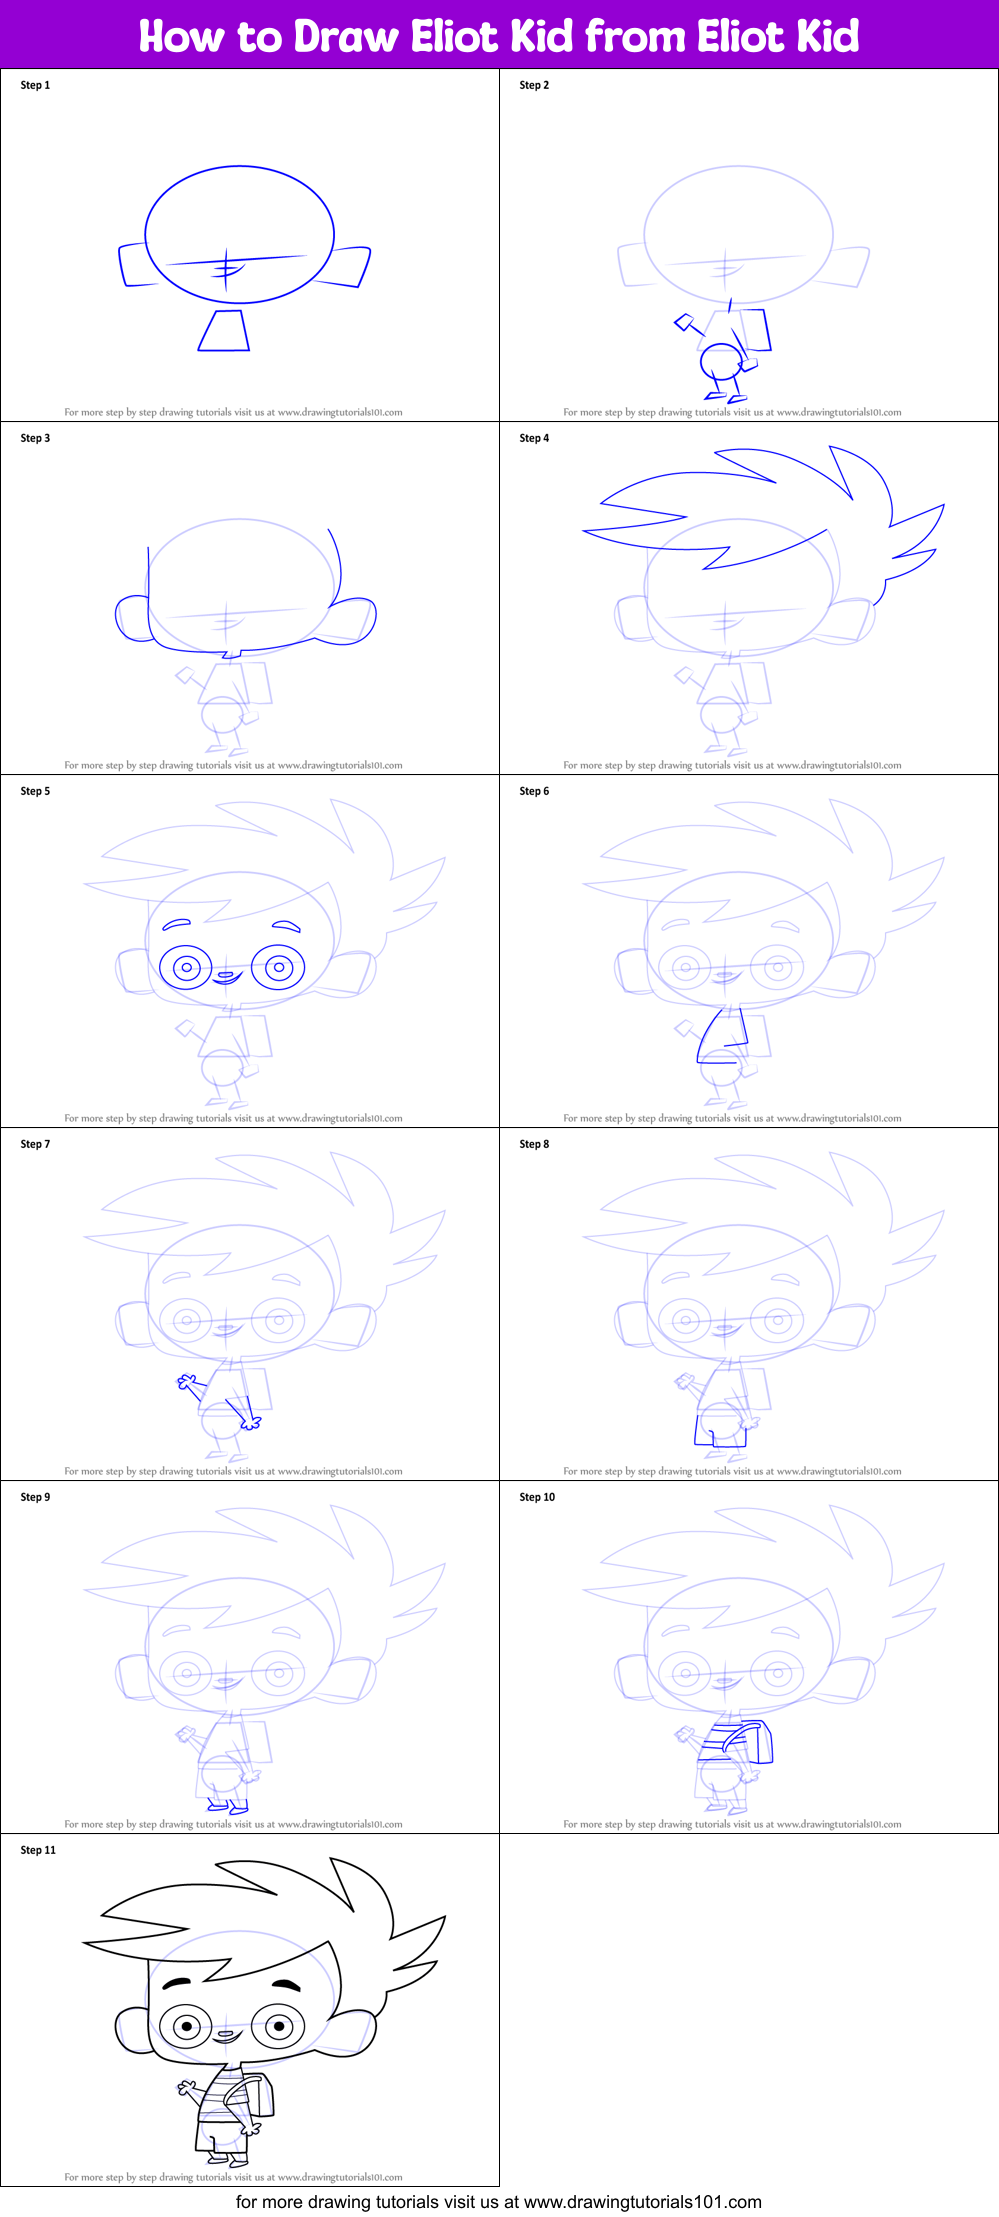 How to Draw Eliot Kid from Eliot Kid (Eliot Kid) Step by Step ...